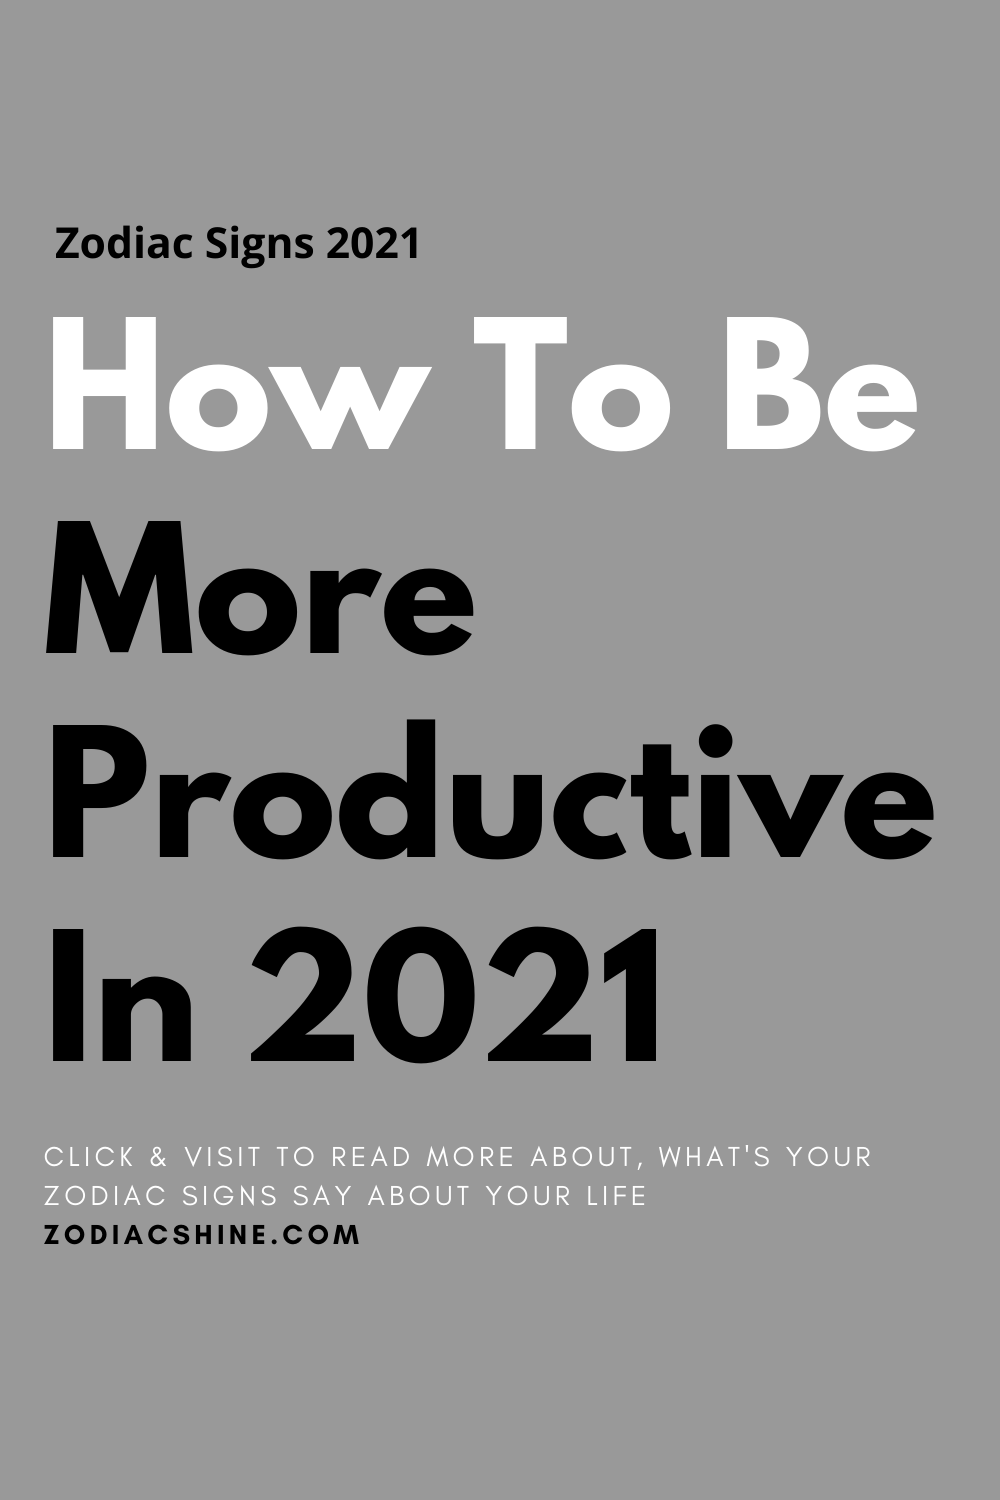 How To Be More Productive In 2021